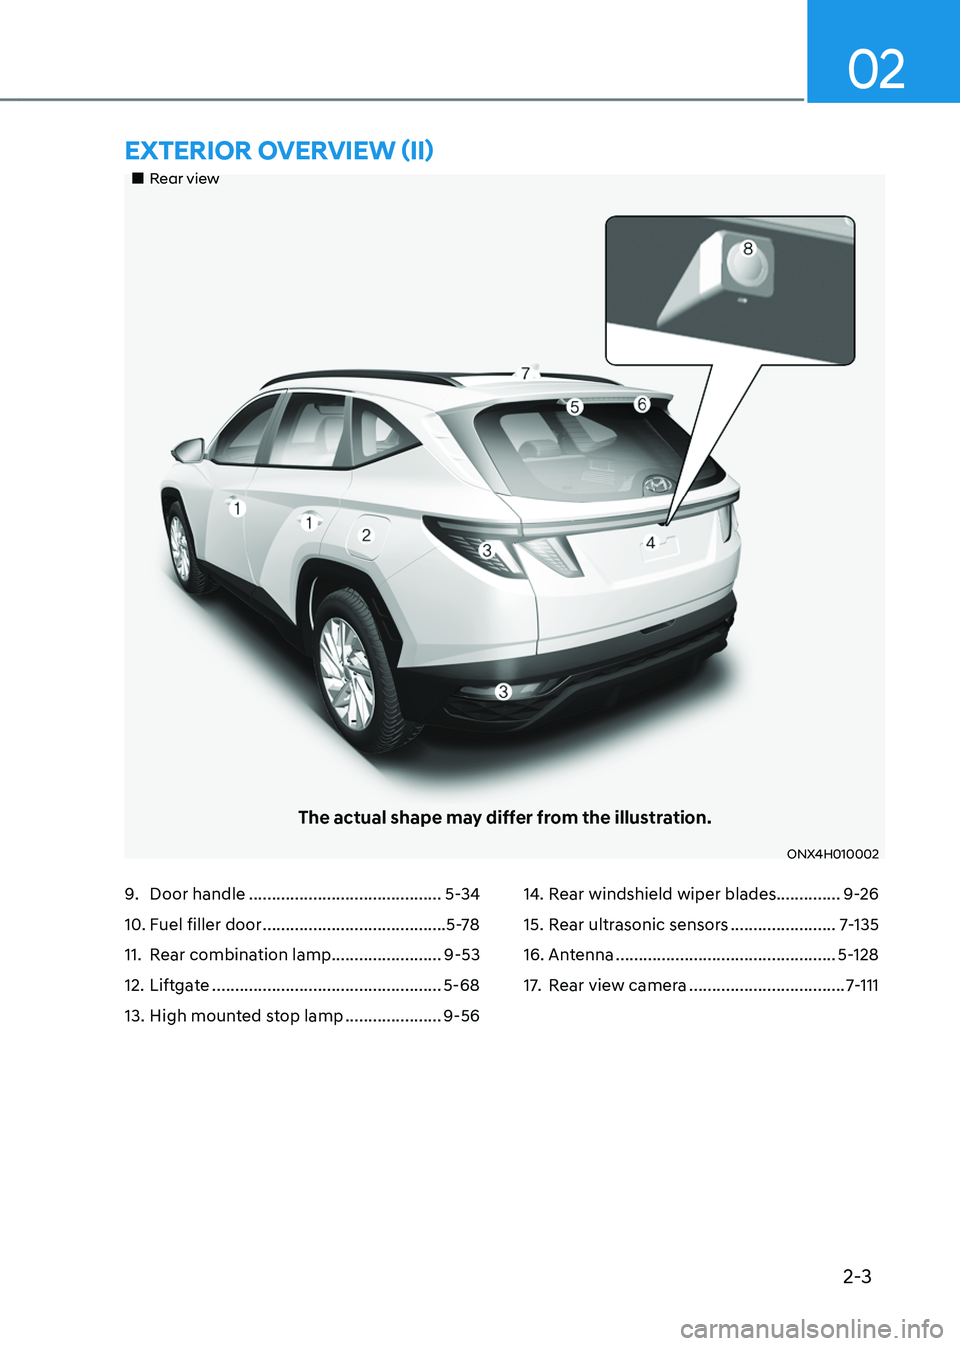 HYUNDAI TUCSON HYBRID 2021  Owners Manual 2-3
02
„„Rear view
The actual shape may differ from the illustration.
ONX4H010002
EXTERIOR OVERVIEW (II)
9. Door handle ..........................................5-34
10. Fuel filler door ..